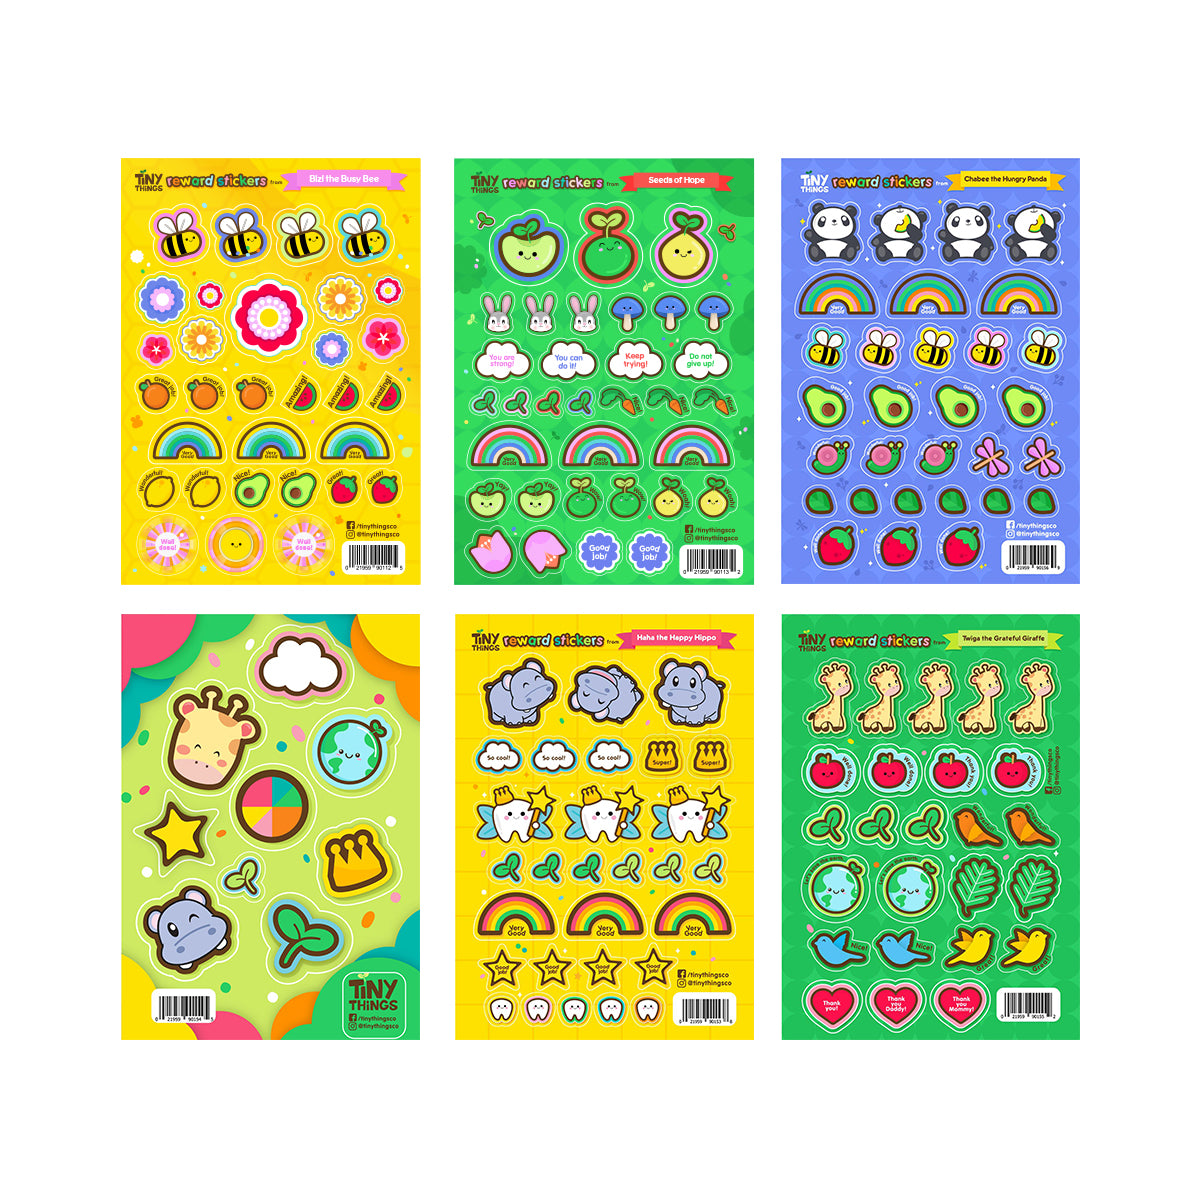 TINY THINGS Reward Stickers Collection (6 pcs)